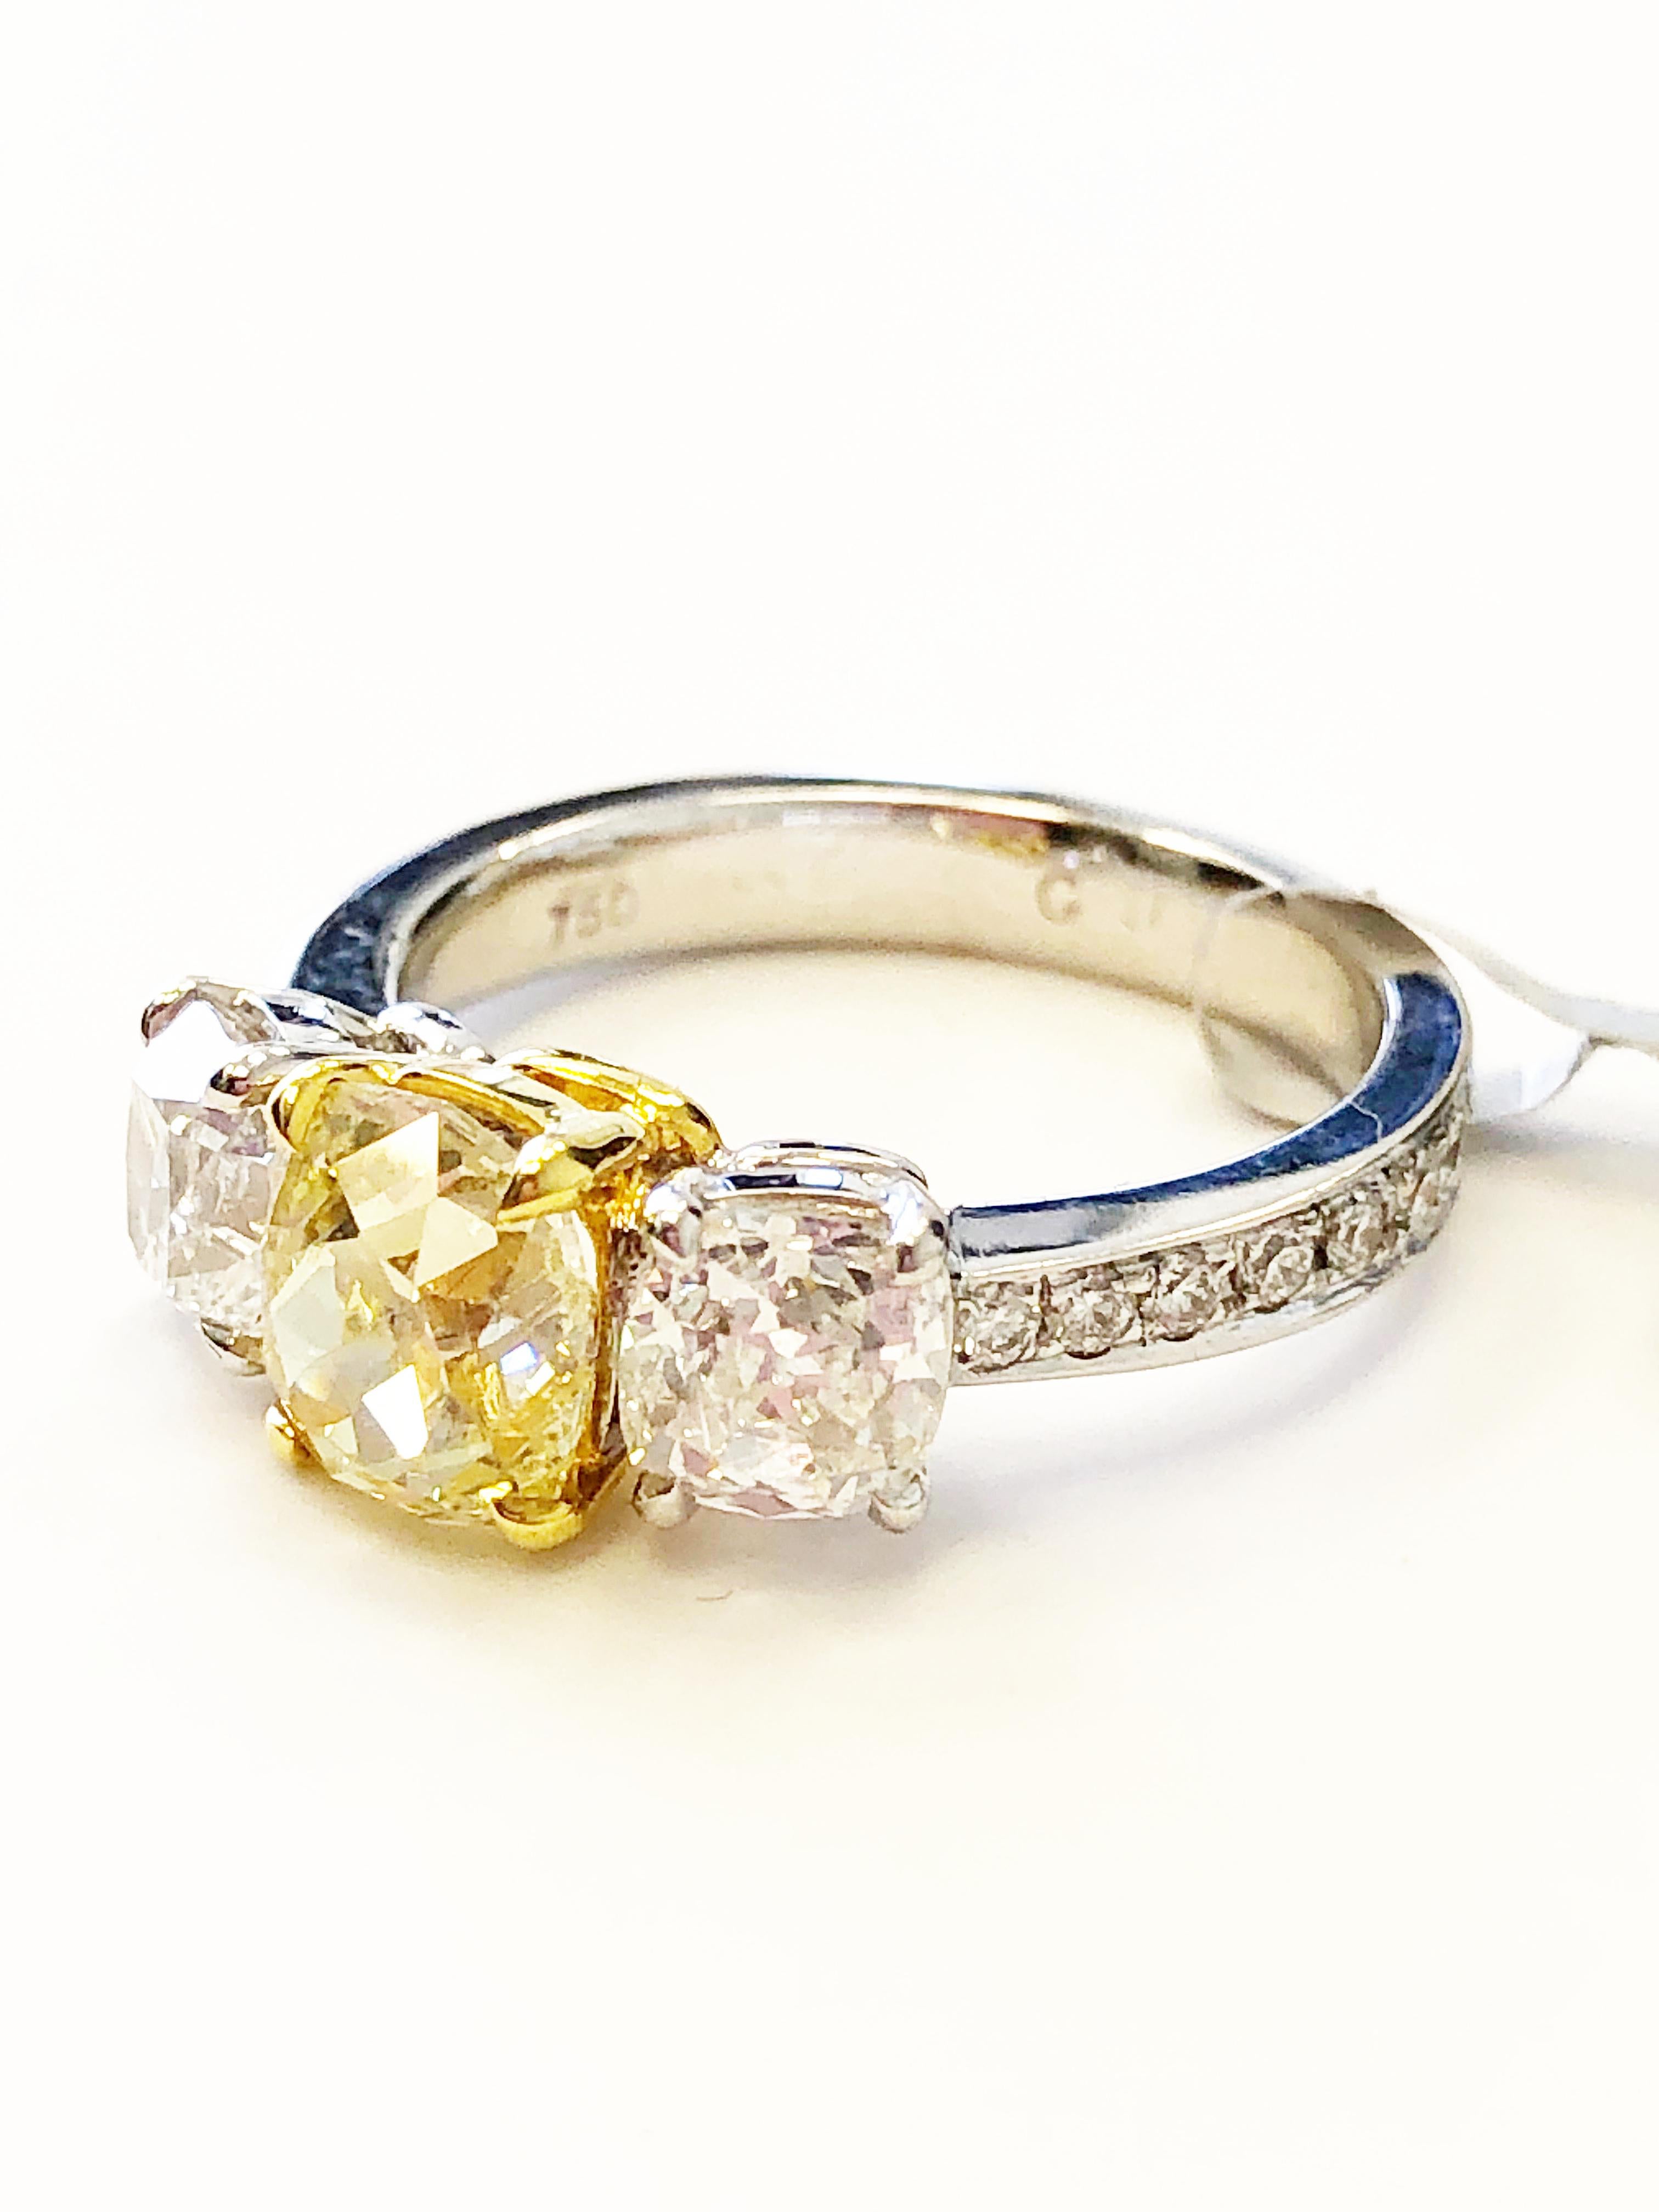 Gorgeous sunshine fancy yellow cushion weighing 1.45 carats with 1.63 carats of good quality white diamond rounds.  Handmade mounting in 18k two tone gold in size 6.  Beautiful ring with GIA certificate.

